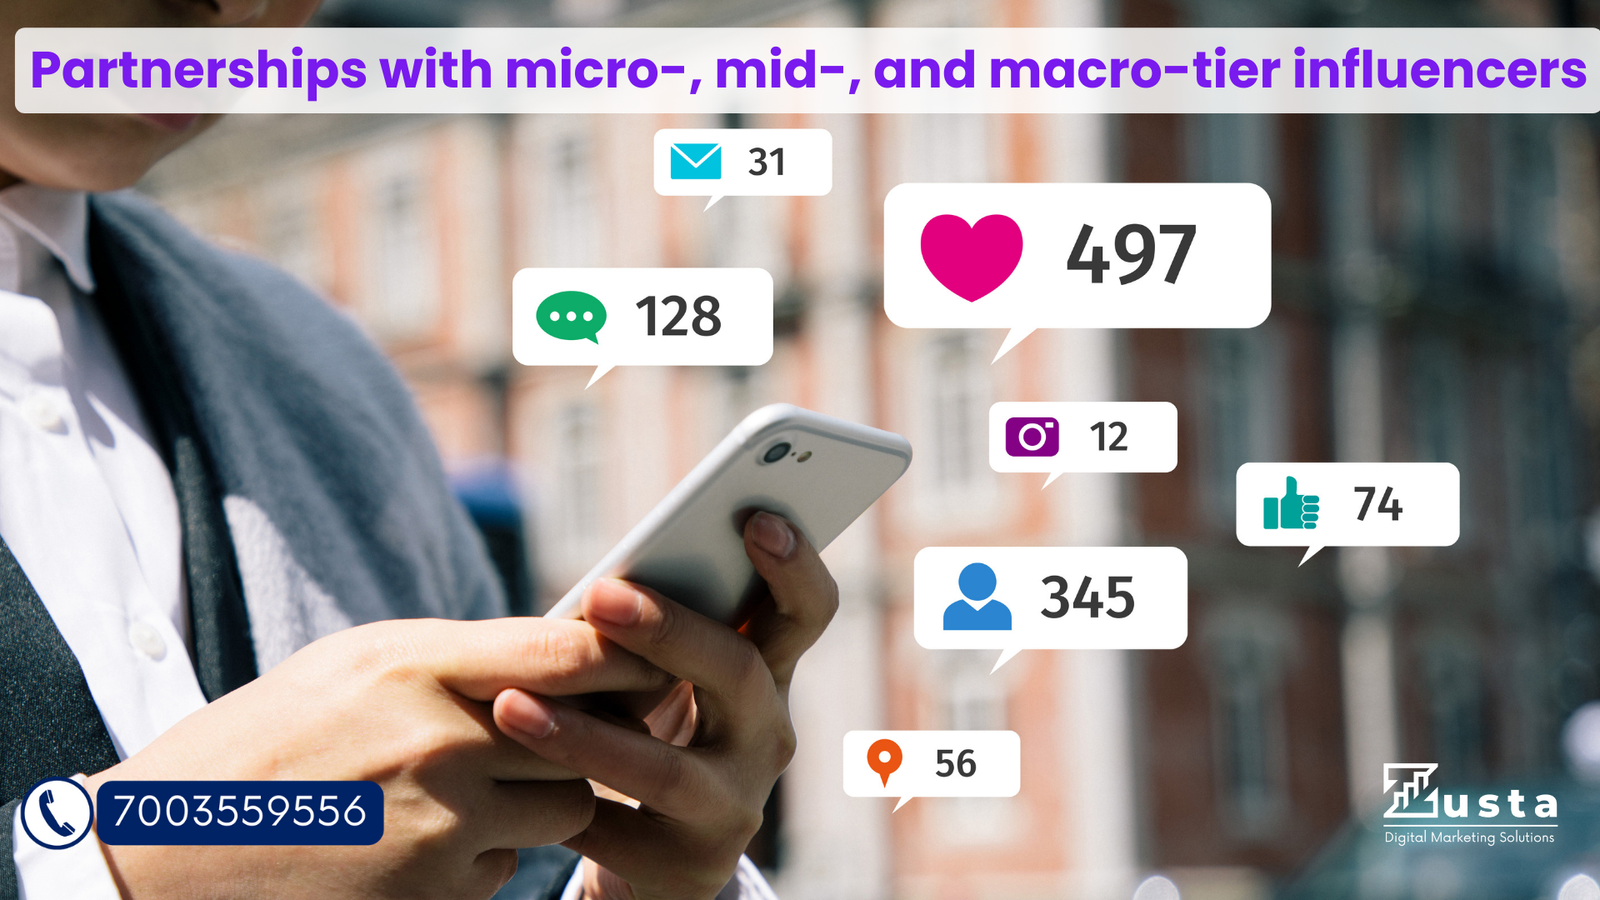 Partnerships with micro-, mid-, and macro-tier influencers